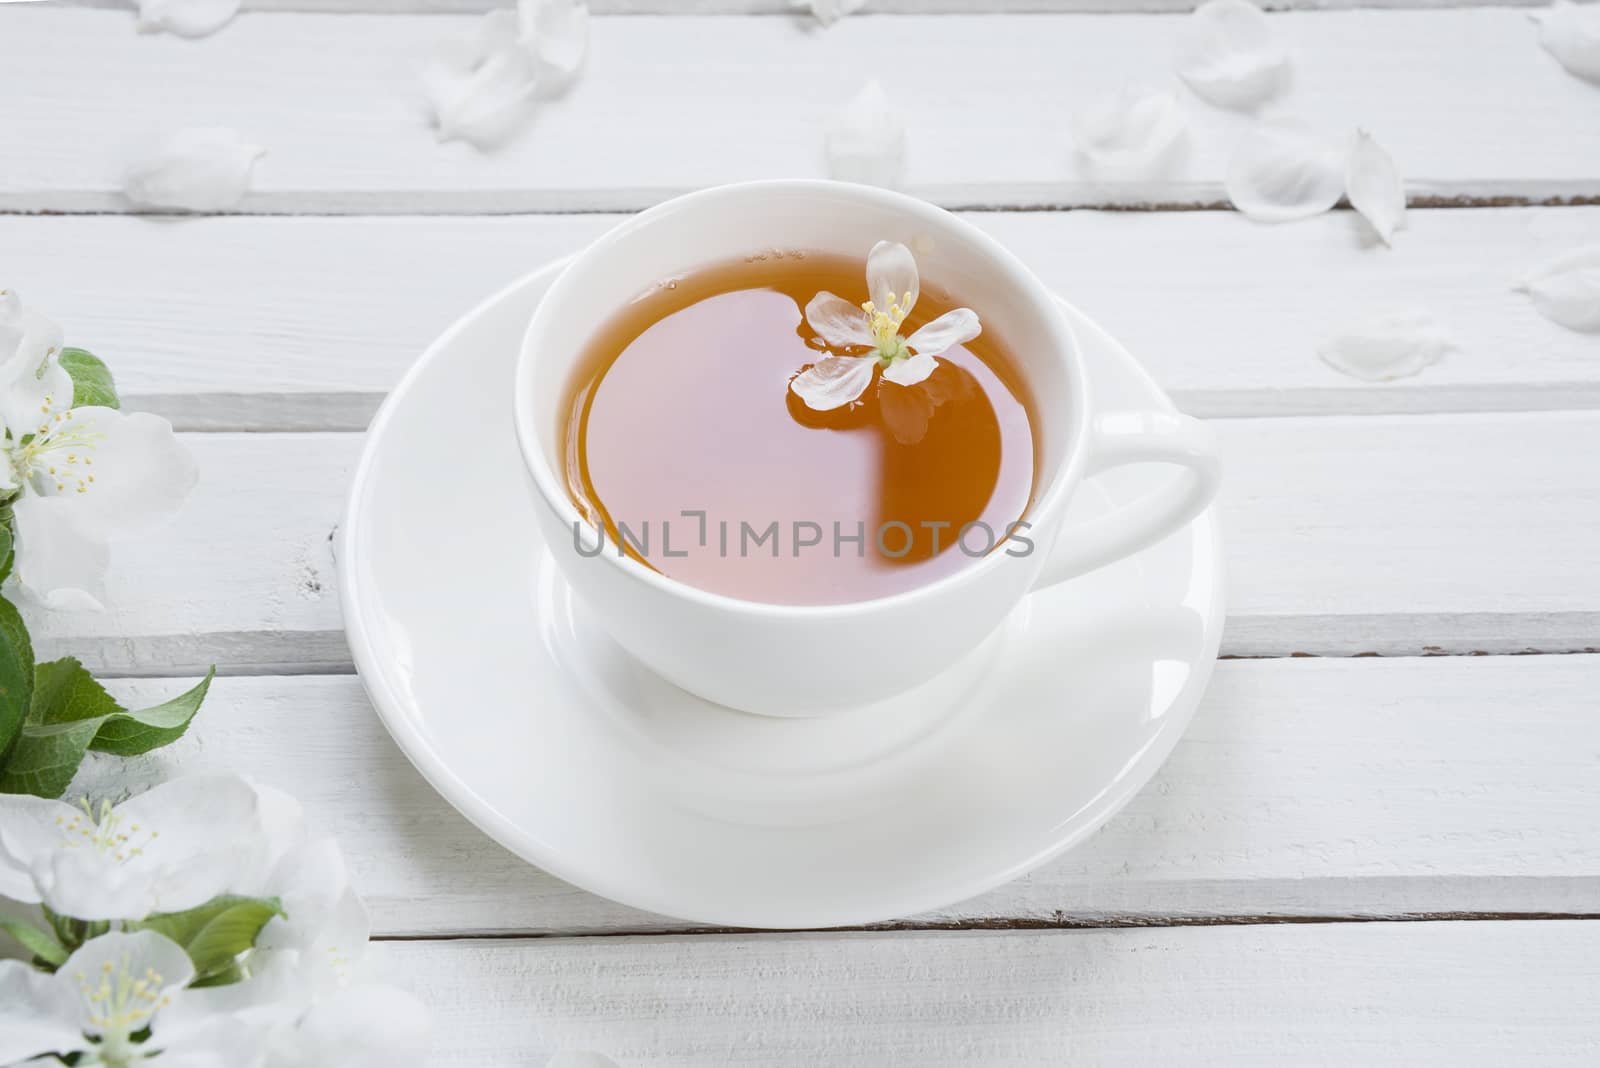 Green tea in white porcelain cup by Epitavi